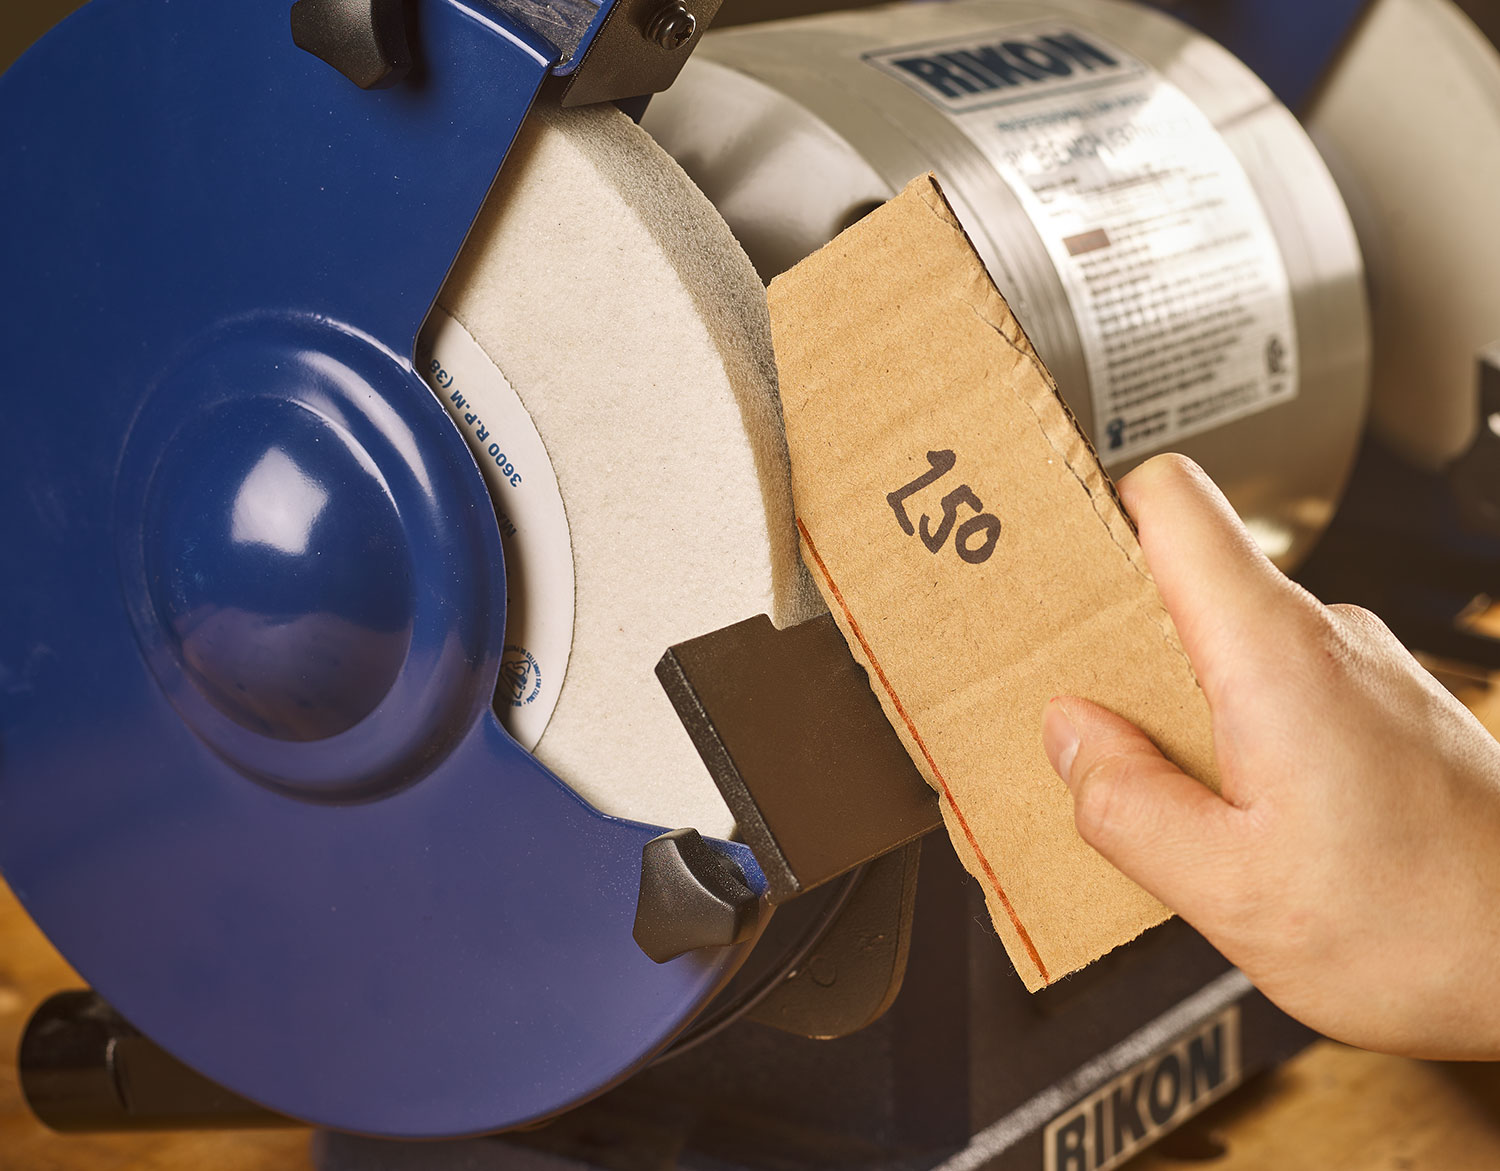 Photo 7 – You can use a simple shop-made cardboard jig to set the grinding angle.